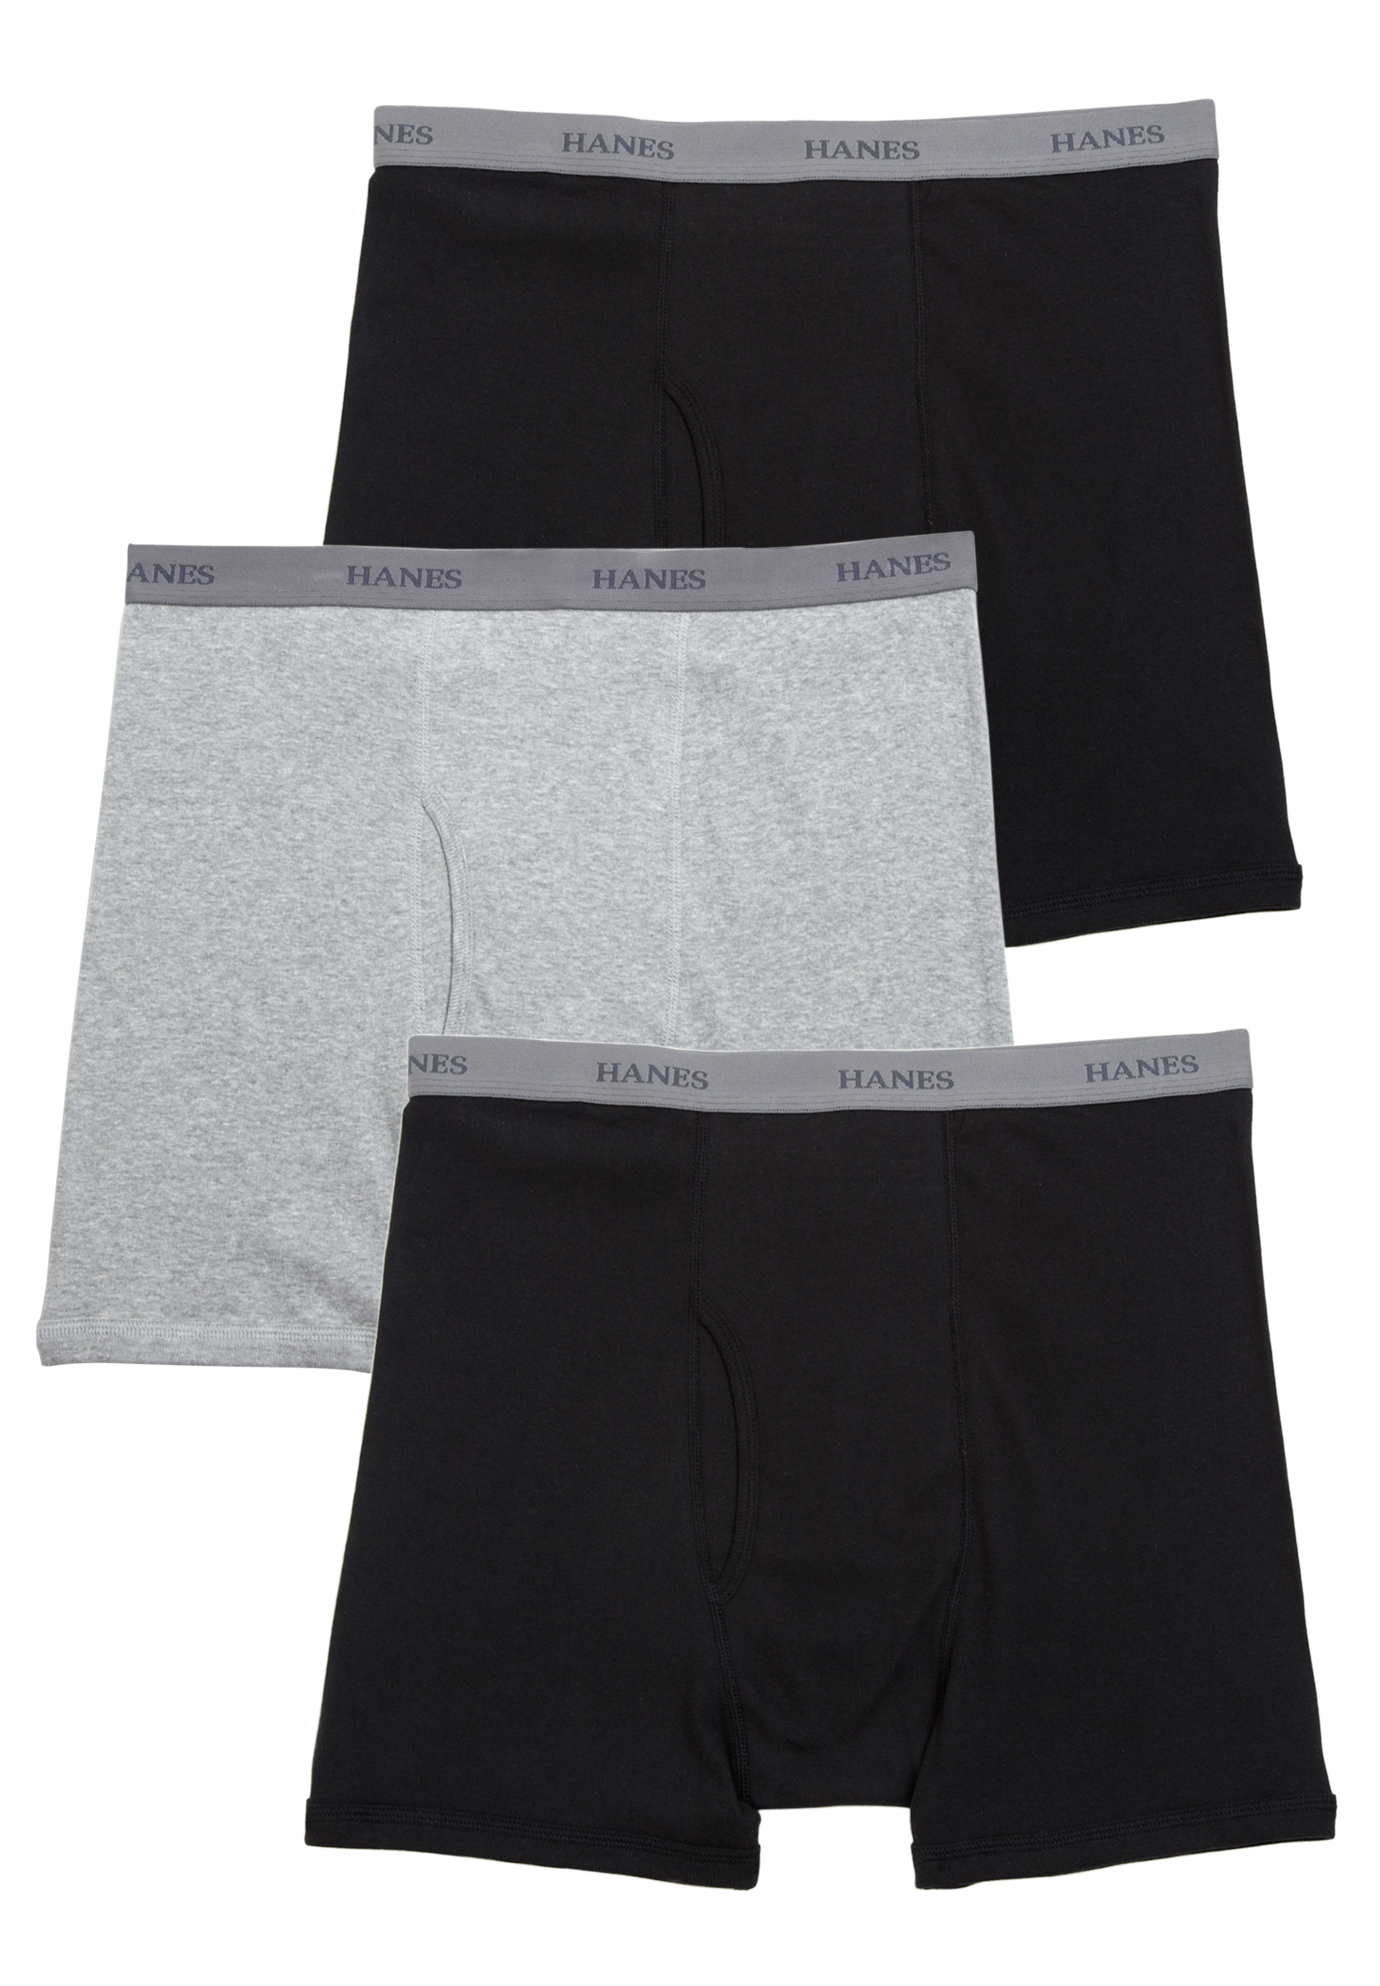 Hanes® Boxer Brief 3-Pack| Big and Tall All Underwear | King Size